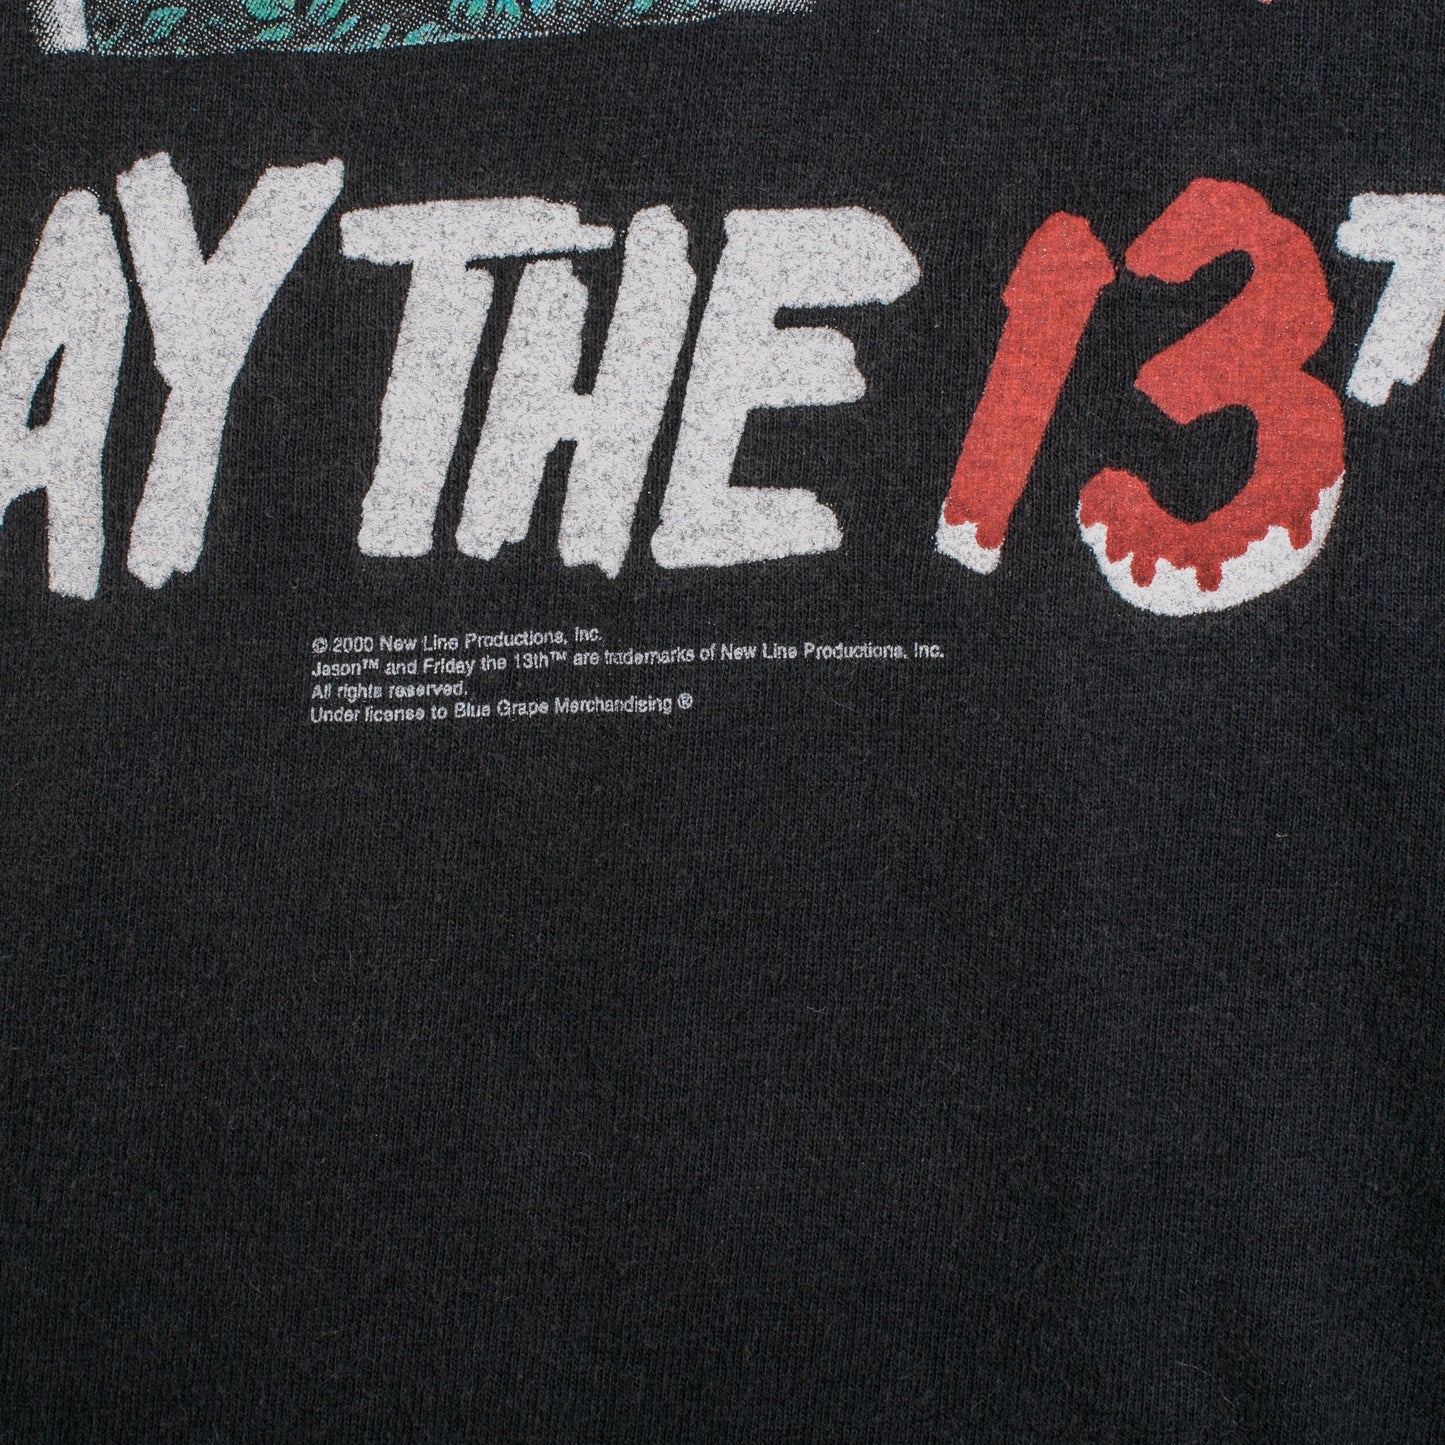 Vintage 2000 Friday The 13th Movie Promo T-Shirt